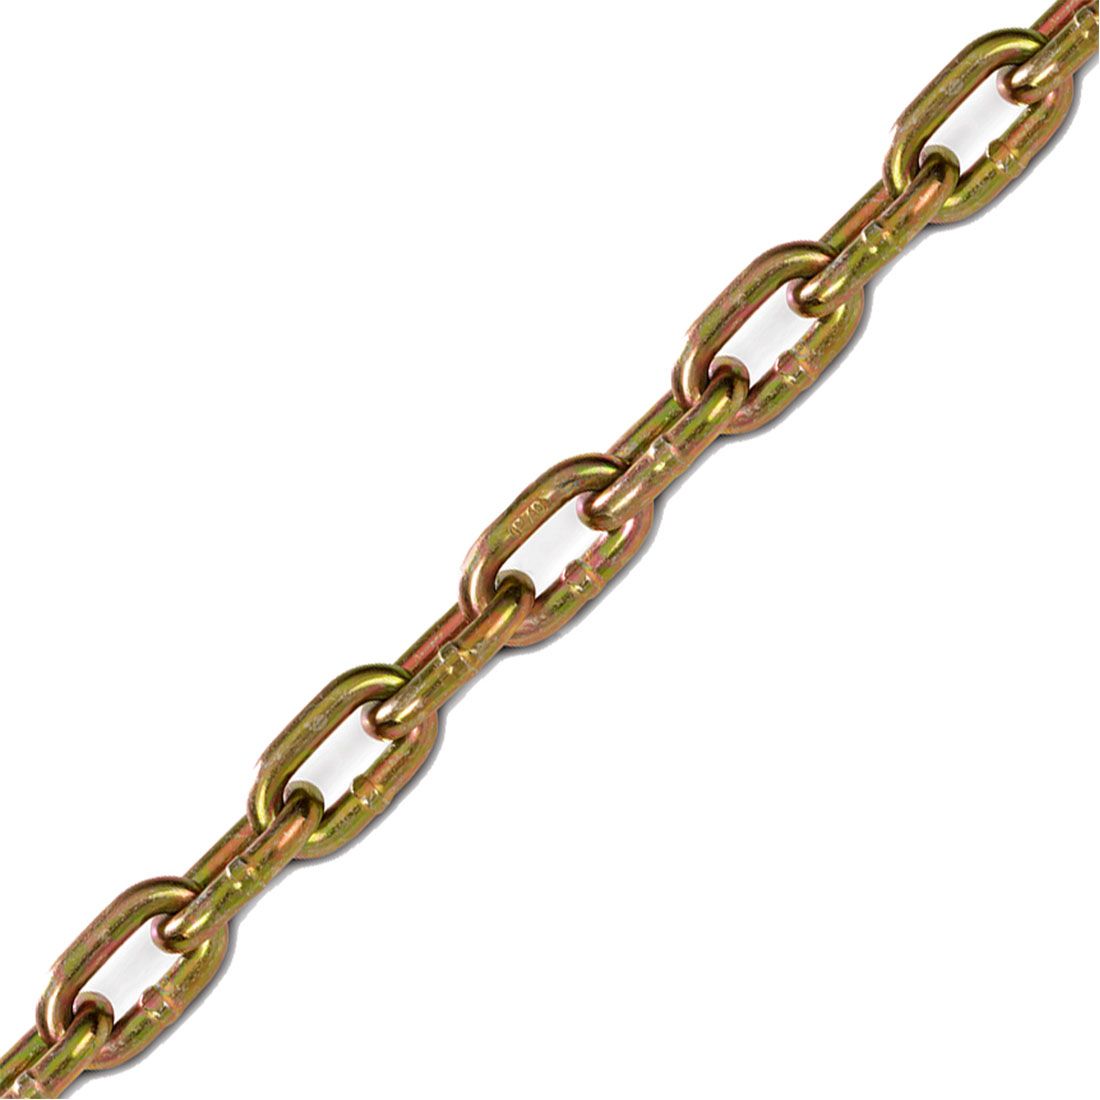 Yellow Chromate 3150 lbs Load Capacity Campbell 0510426 System 7 Grade 70 Carbon Steel Transport Chain in Square Pail 1/4 Trade 65 Length 0.31 Diameter 